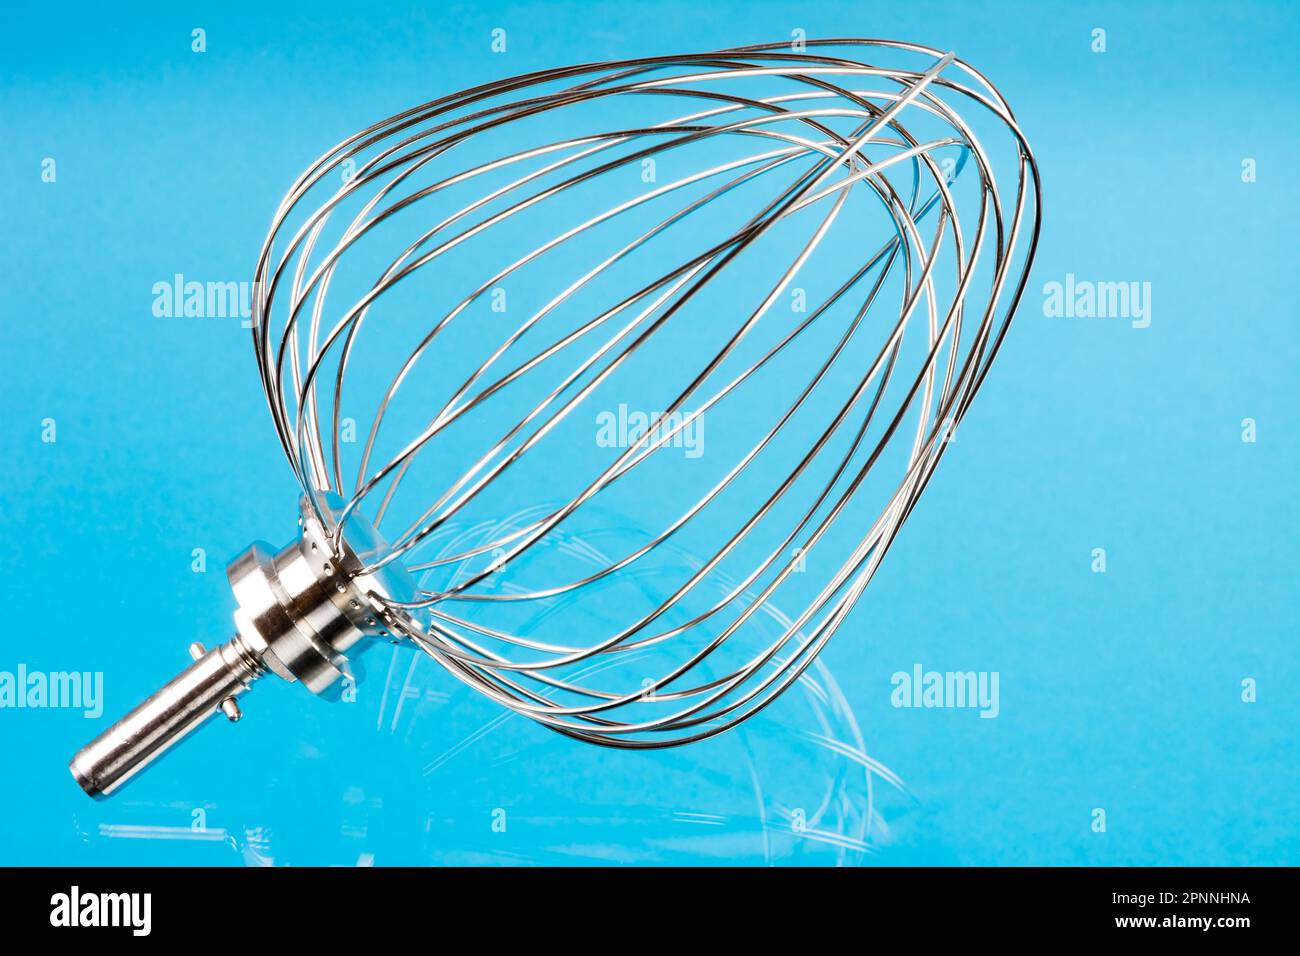 Whisk in a large kitchen Stock Photo - Alamy